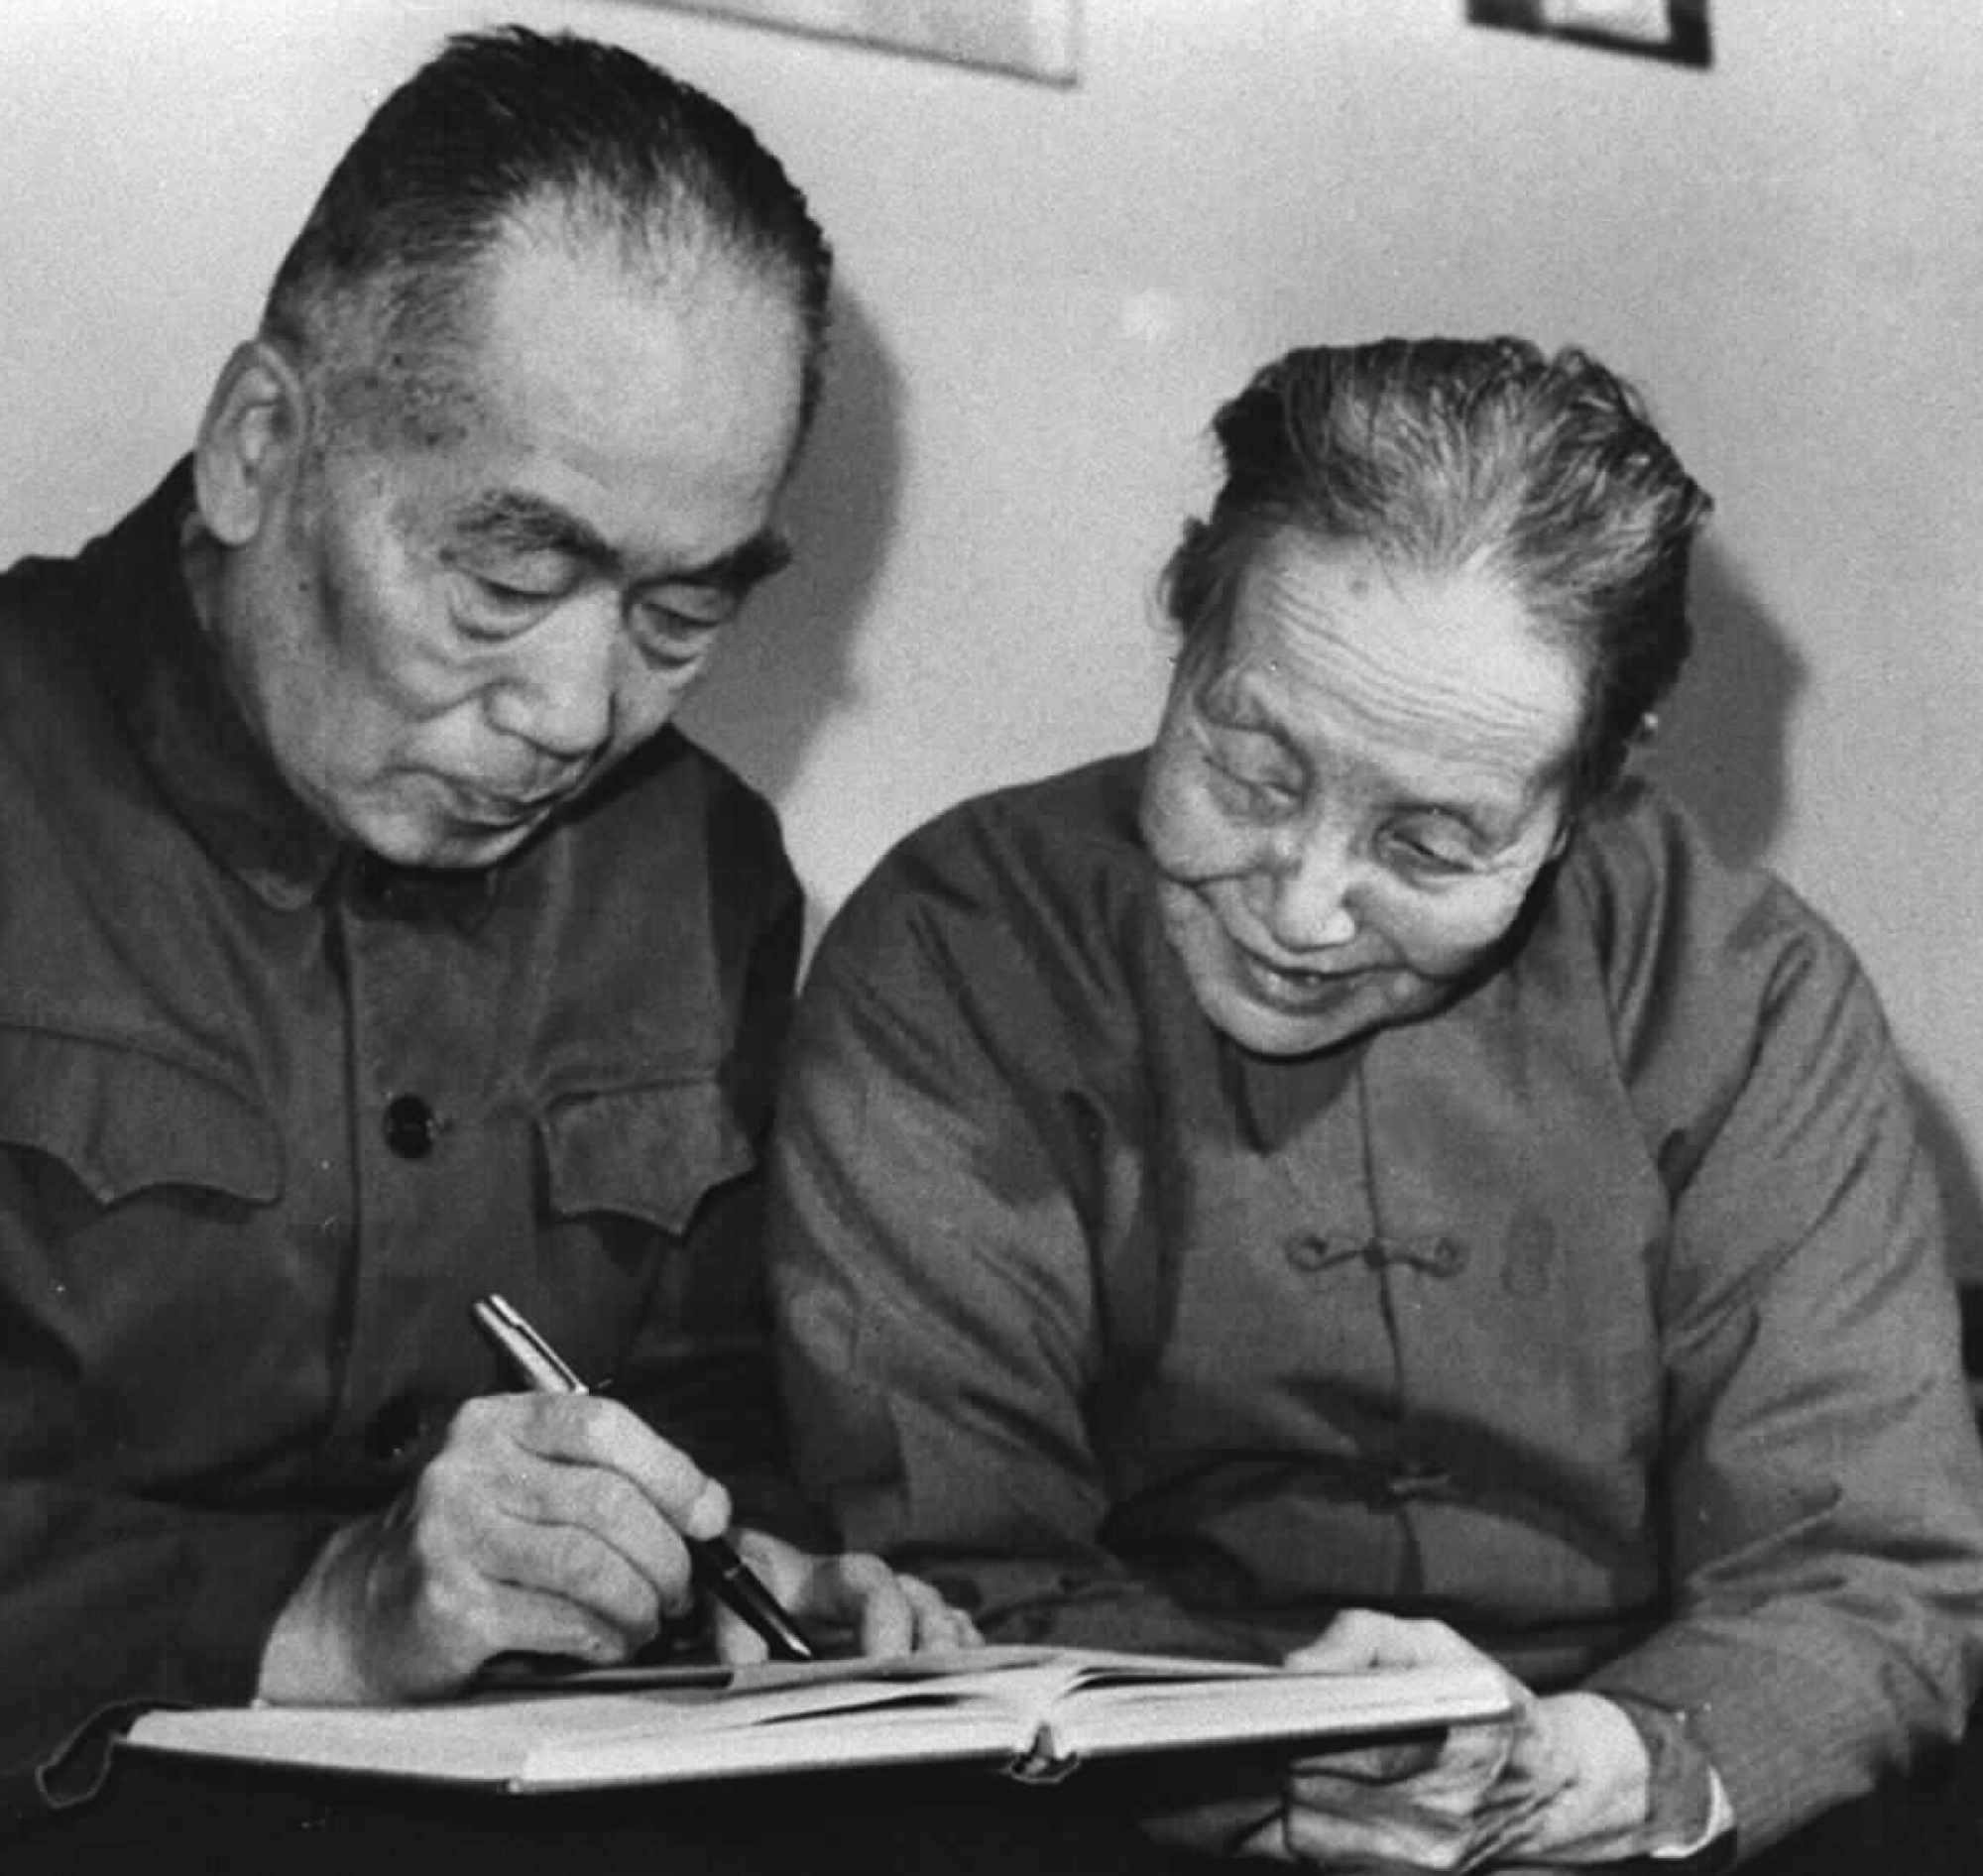 Chinese author Bing Xin (right) wrote a moving tribute to Tagore’s work. Photo: Xinhua